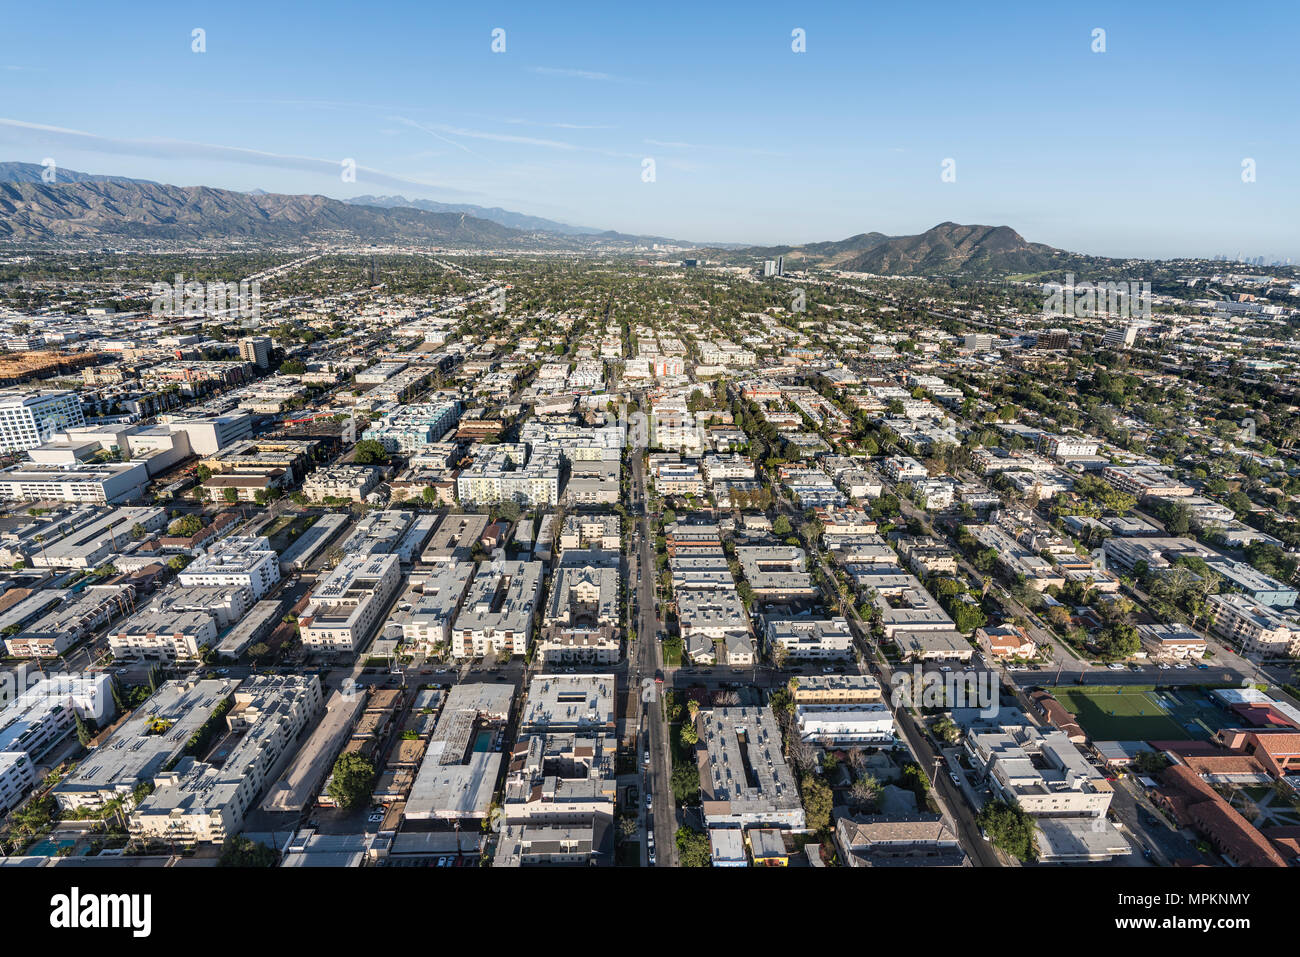 Aerial view of San Fernando Valley homes, apartments and streets in the North Hollywood neighborhood of Los Angeles, California. Stock Photo